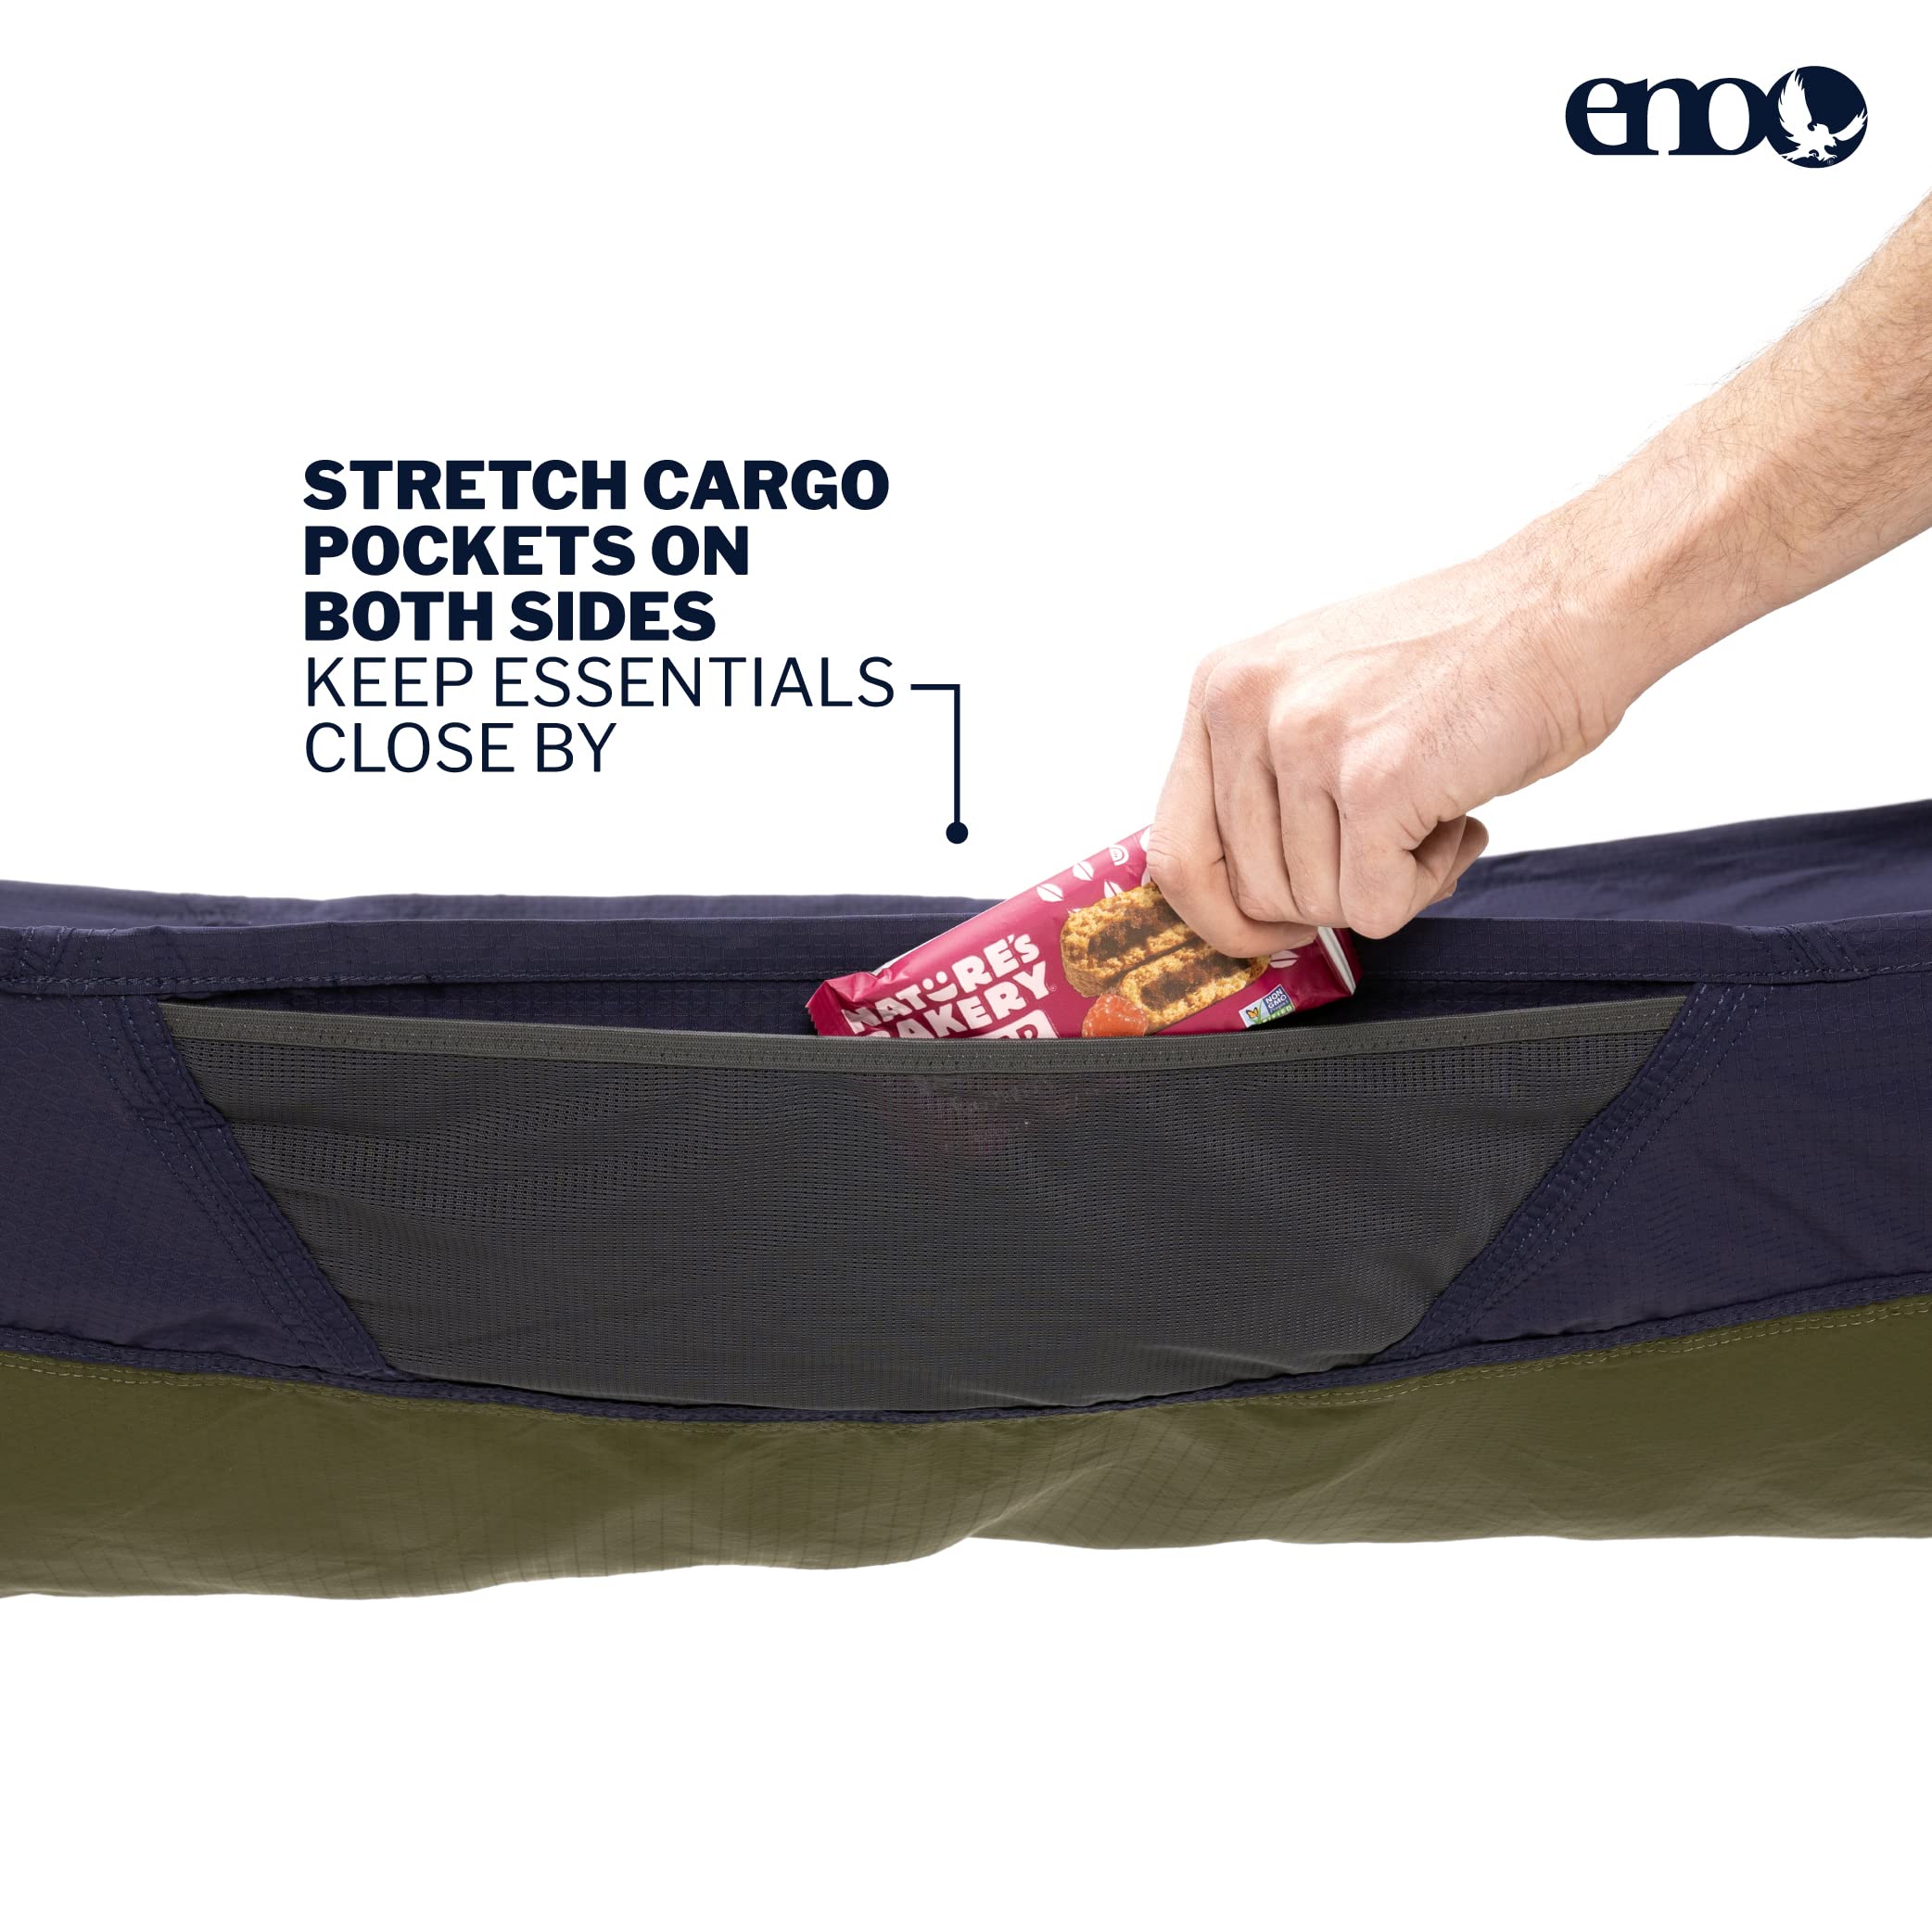 ENO Skyloft Hammock - 1 Person Portable Hammock - for Camping, Hiking, Backpacking, Travel, Festival, or The Beach - Navy/Olive